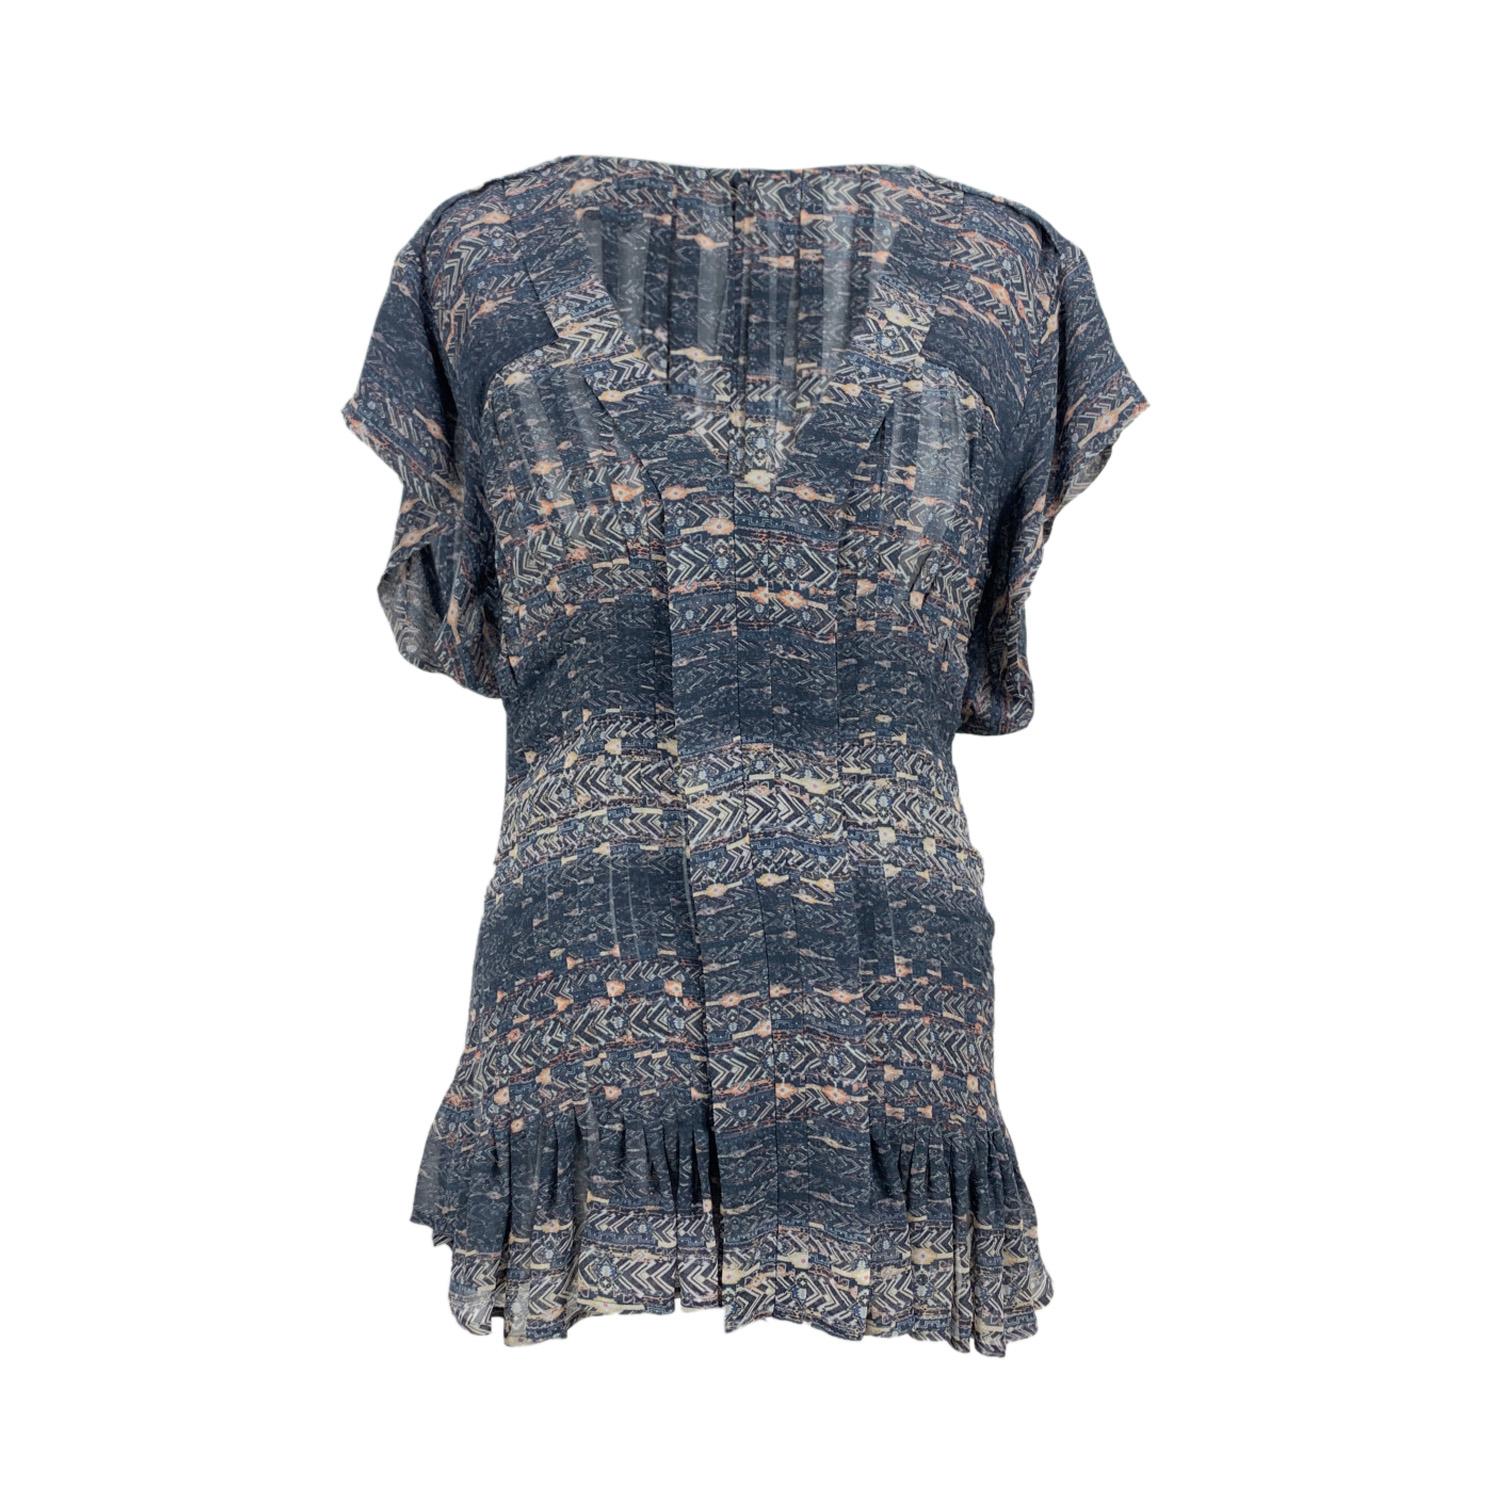 Beautiful Isabel Marant grey silk short sleeve top. Composition: 100% Silk. Rear zip closure. V-neck. Pleated detailing on the hem and on the back. Size:36 FR (The size shown for this item is the size indicated by the designer on the label). It